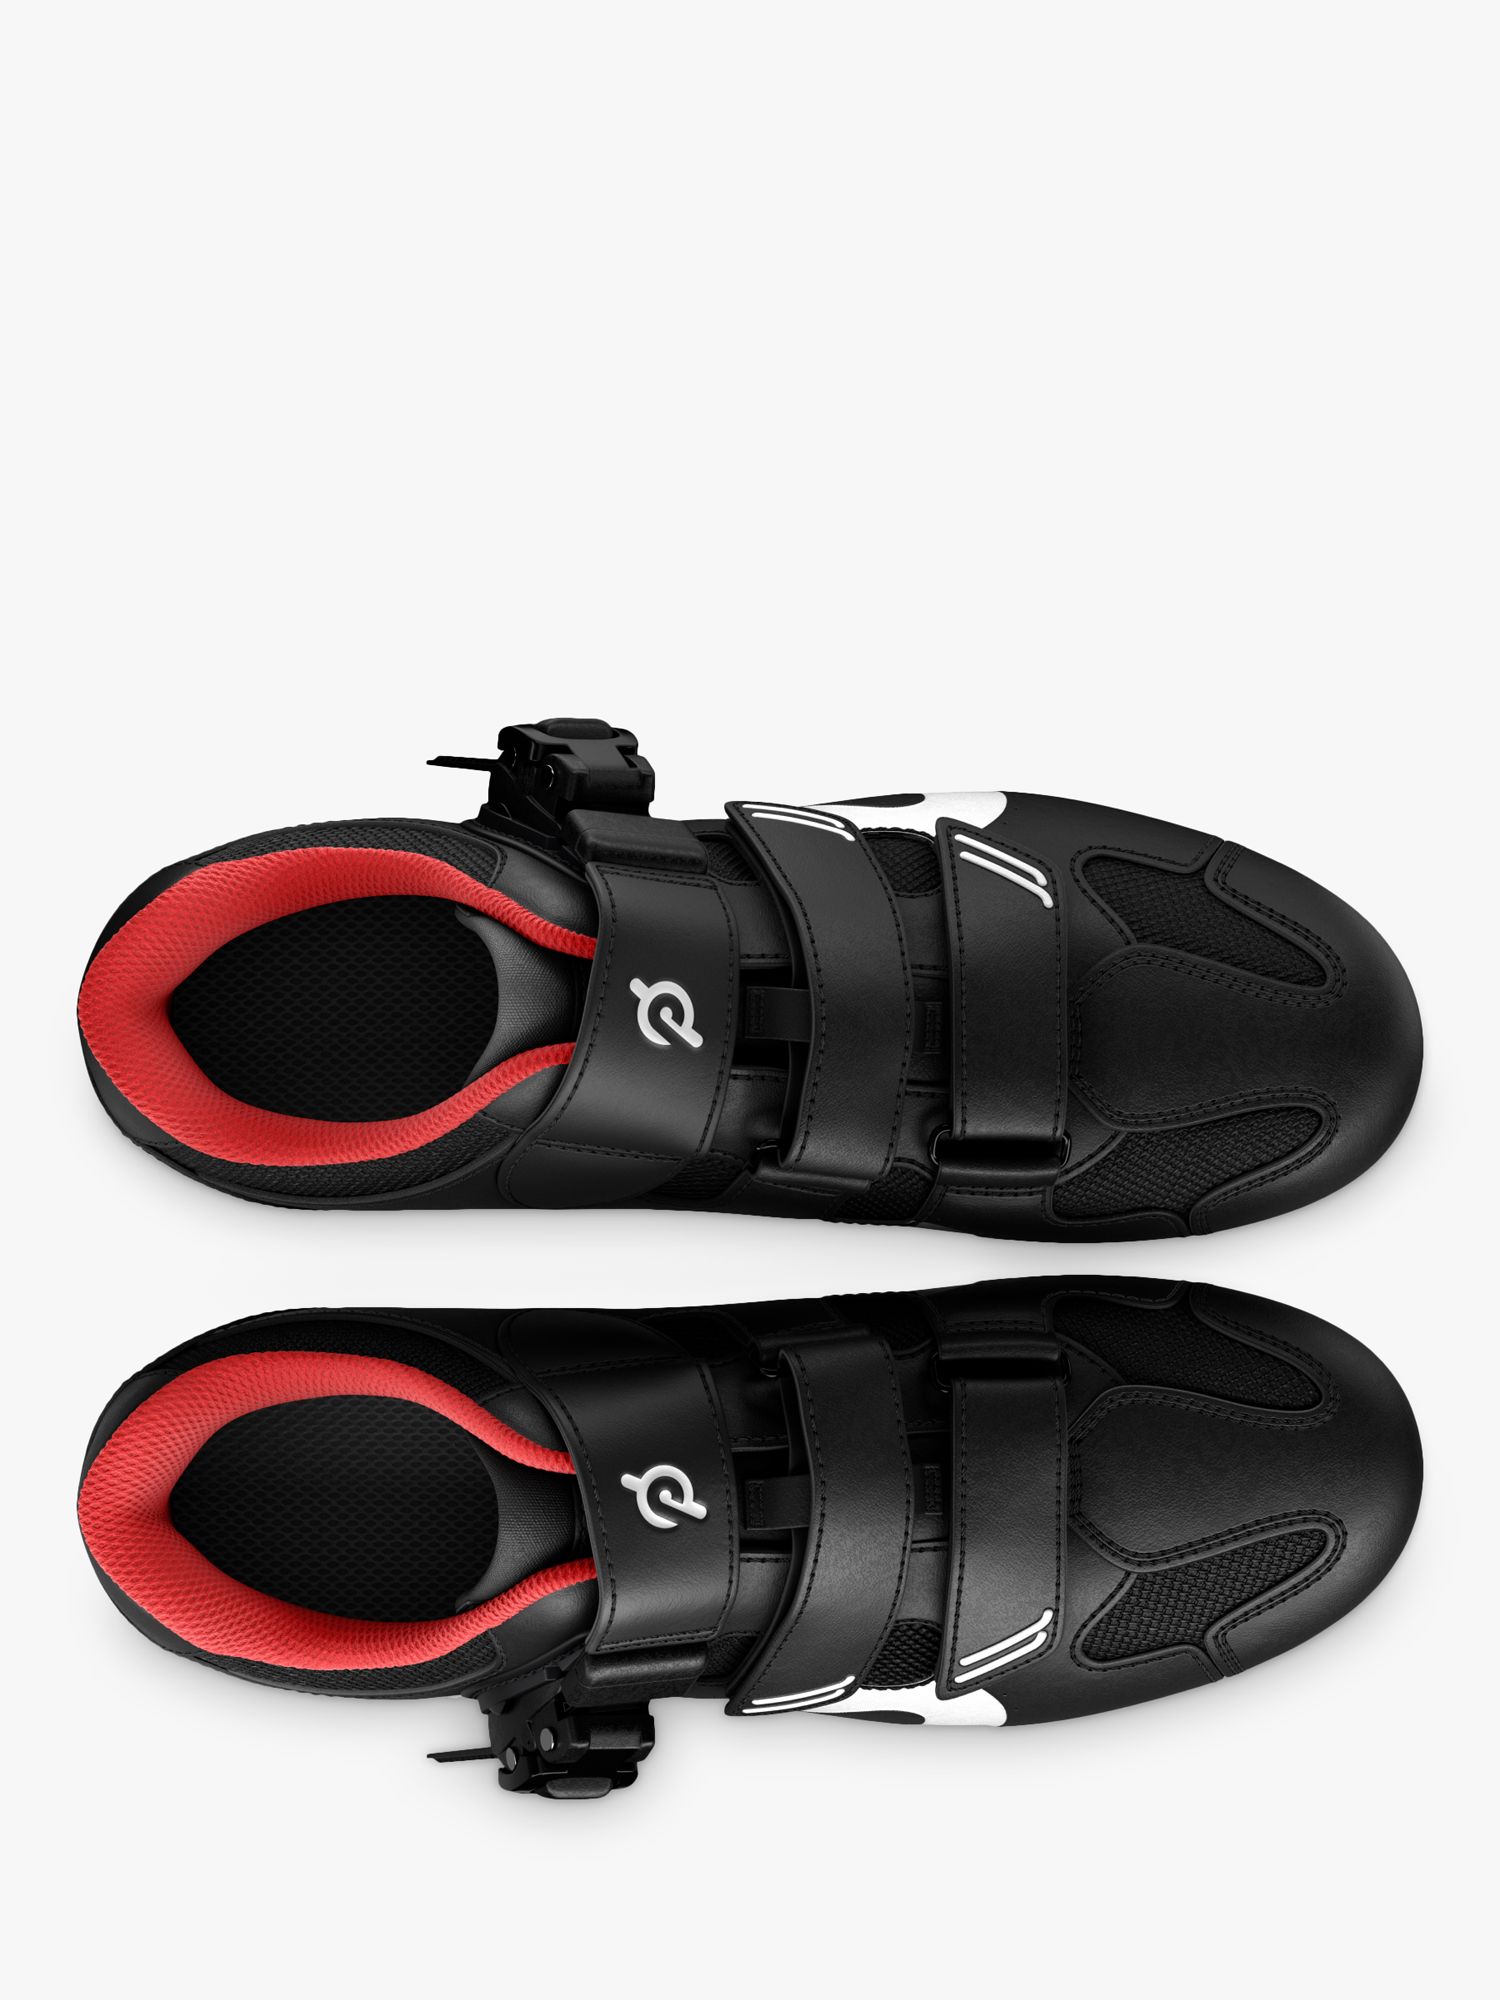 Buy Peloton Cycling Shoes, Black/Red Online at johnlewis.com